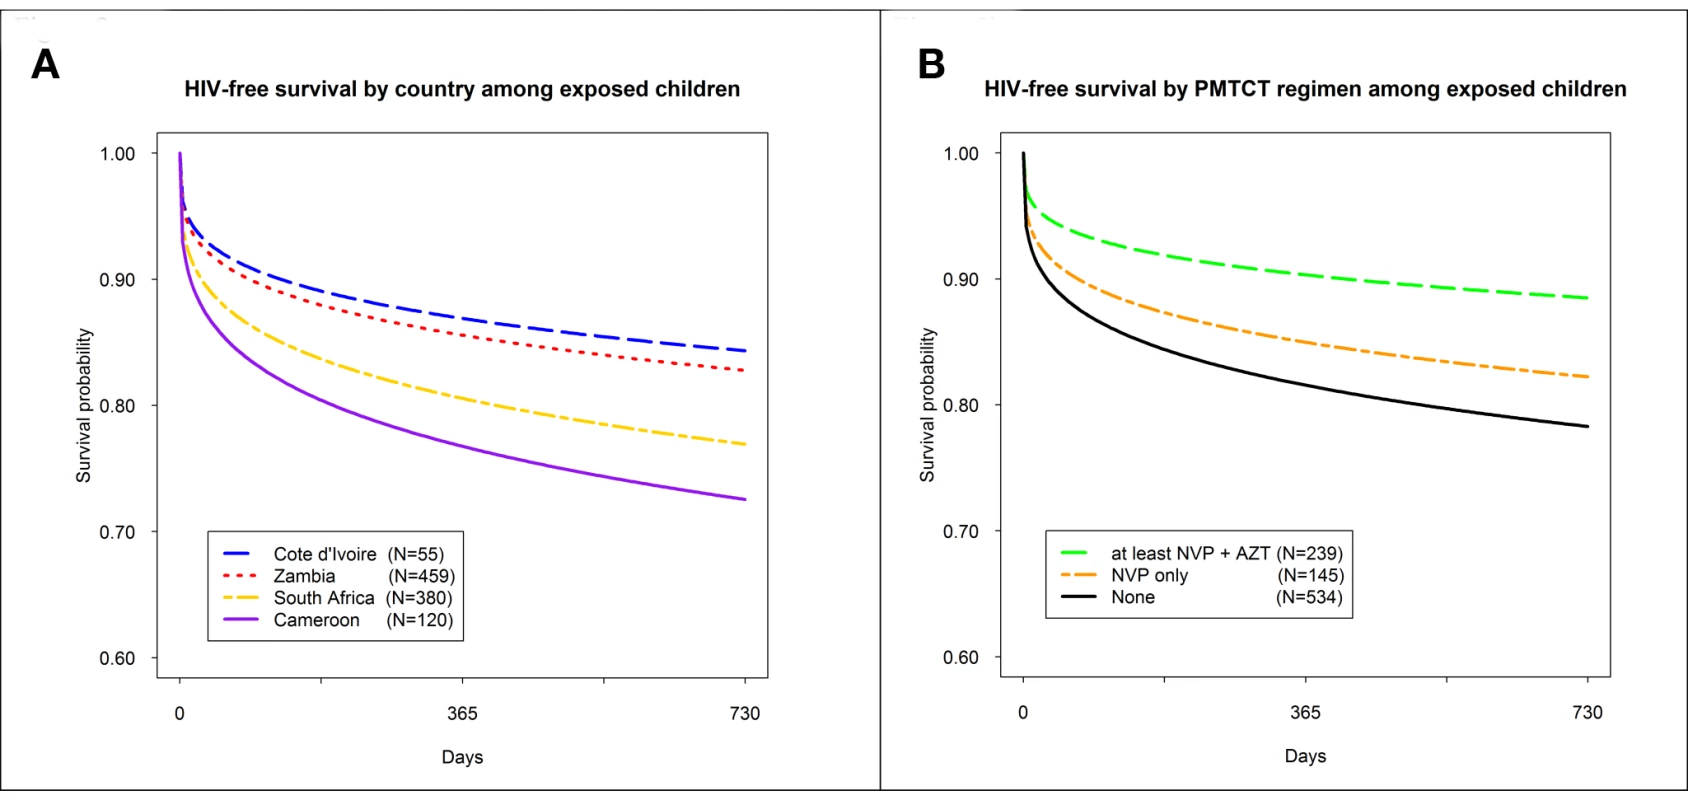 HIV-free survival by country and by PMTCT regimen in the PEARL Study.